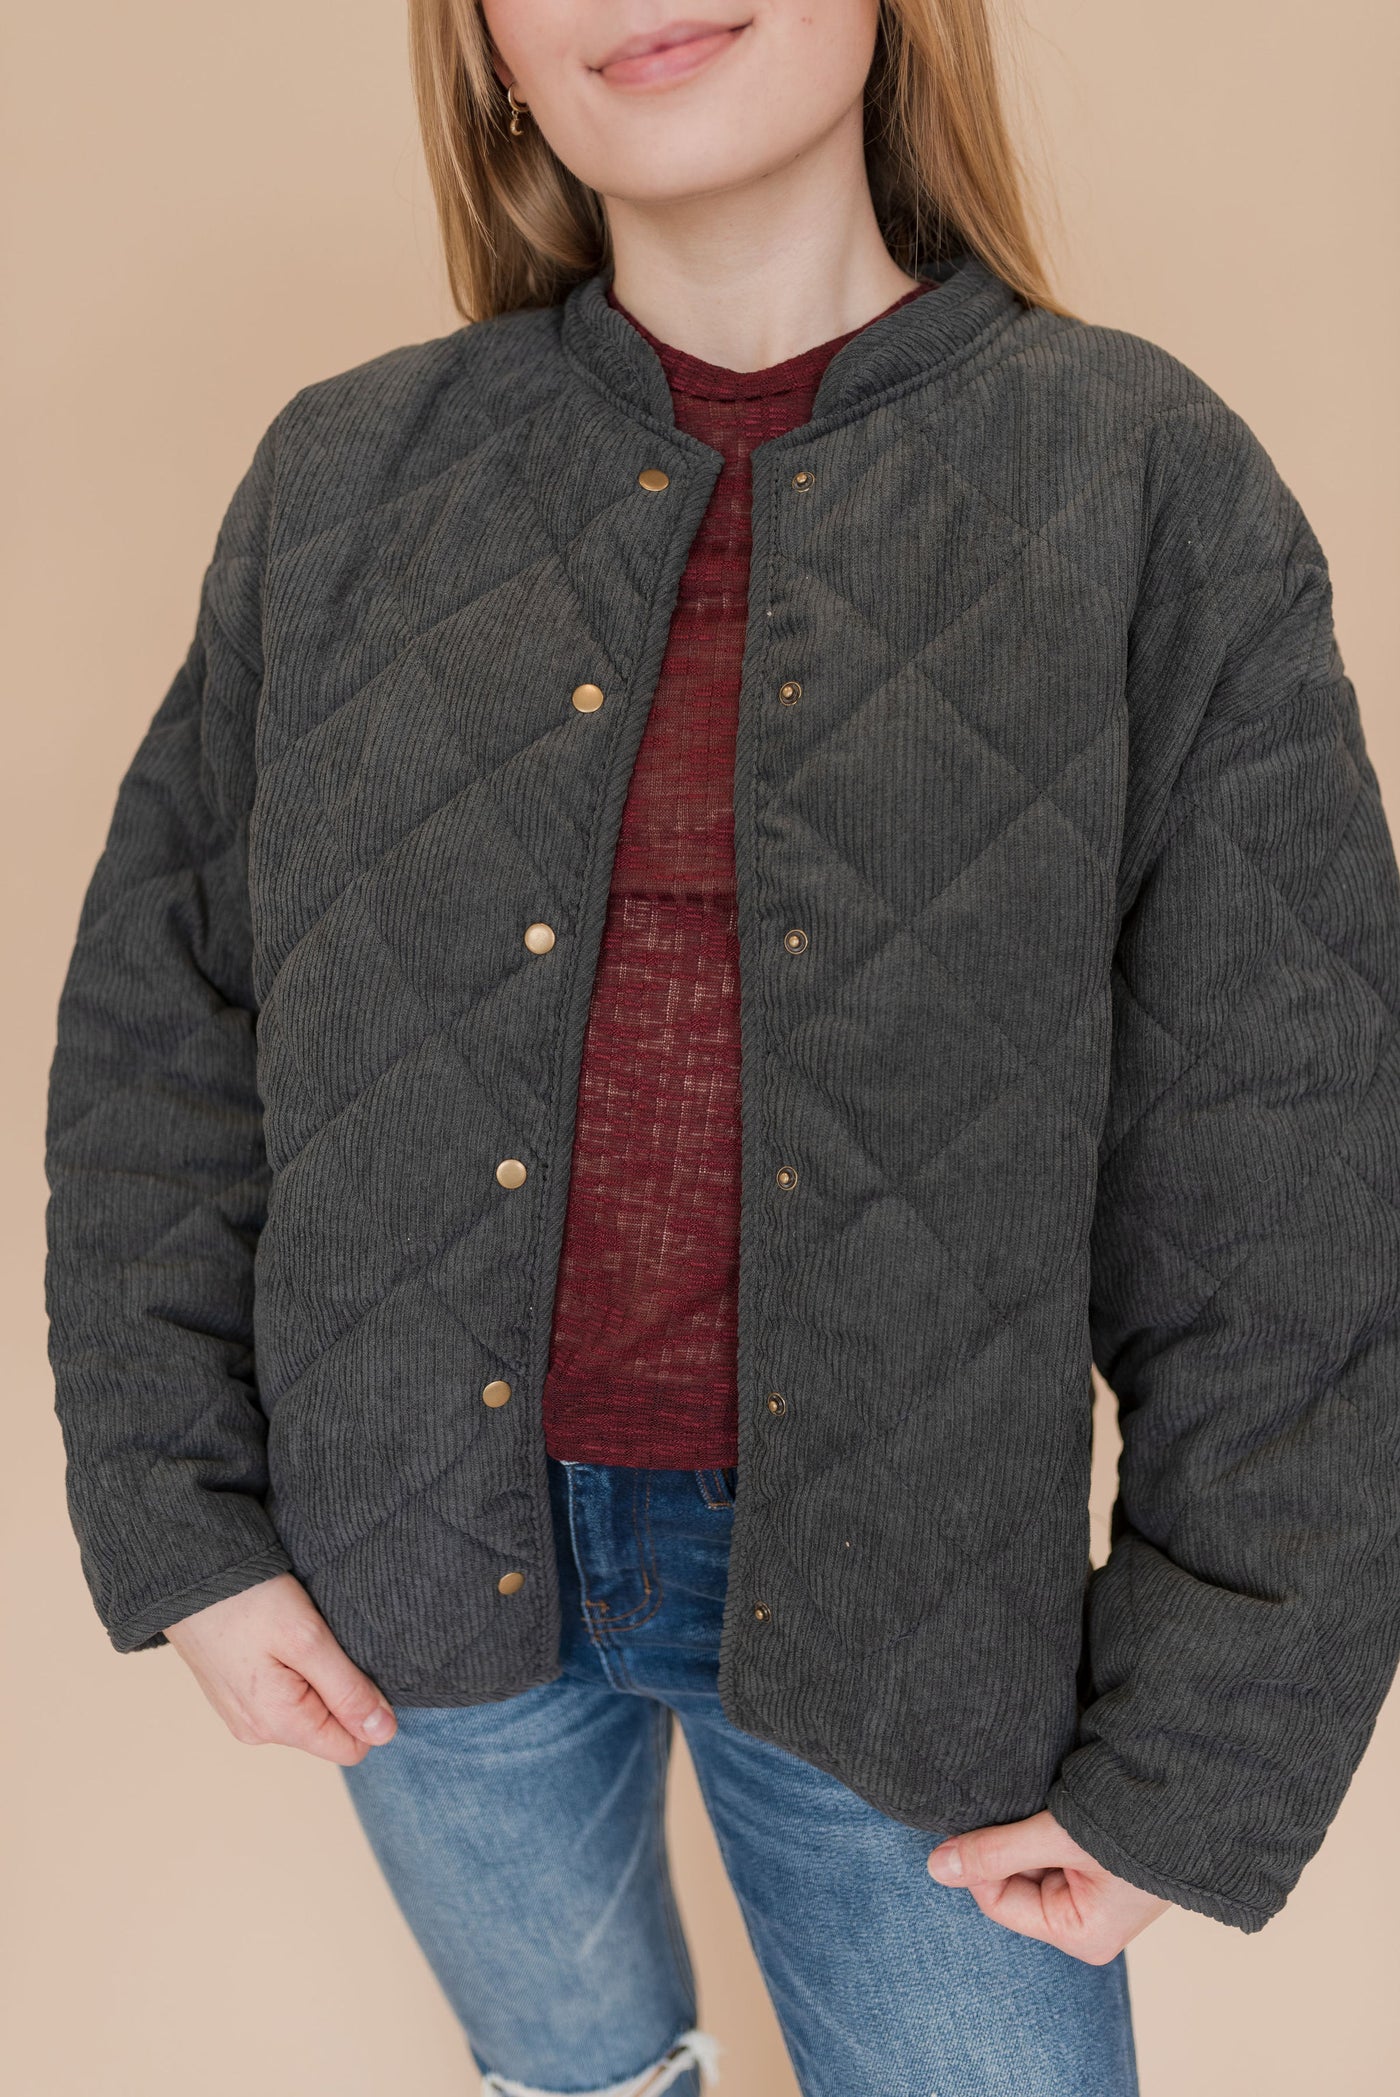 Lorraine Quilted Corduroy Jacket | Charcoal - Poppy and Stella